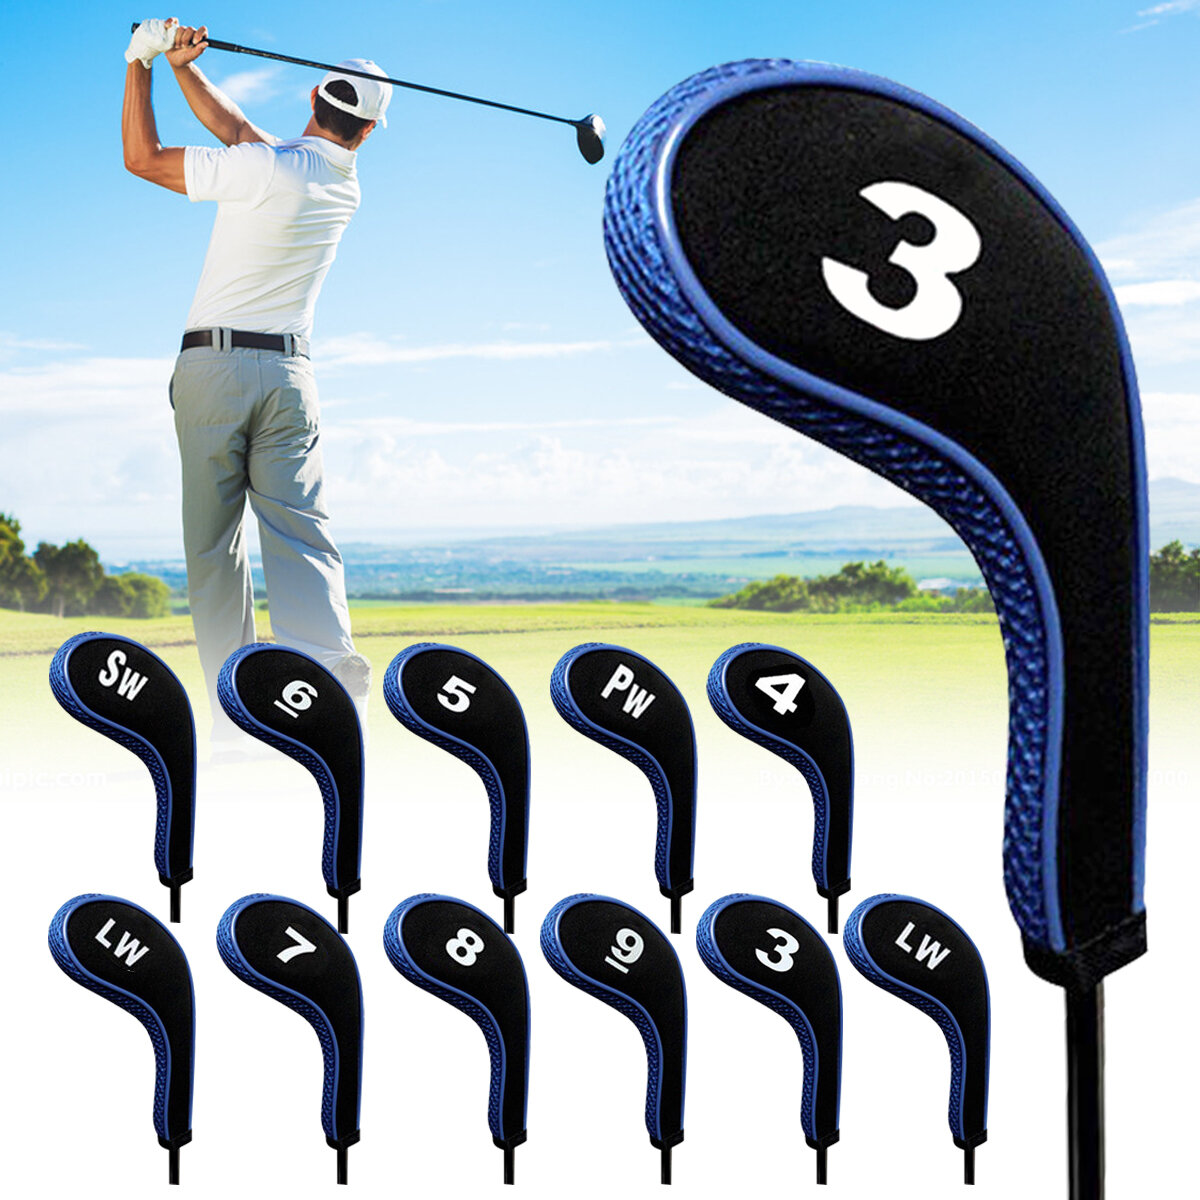 12 stks / set golfclubs ijzeren hoofd covers driver professionele nummer tag headcovers rubber golf 